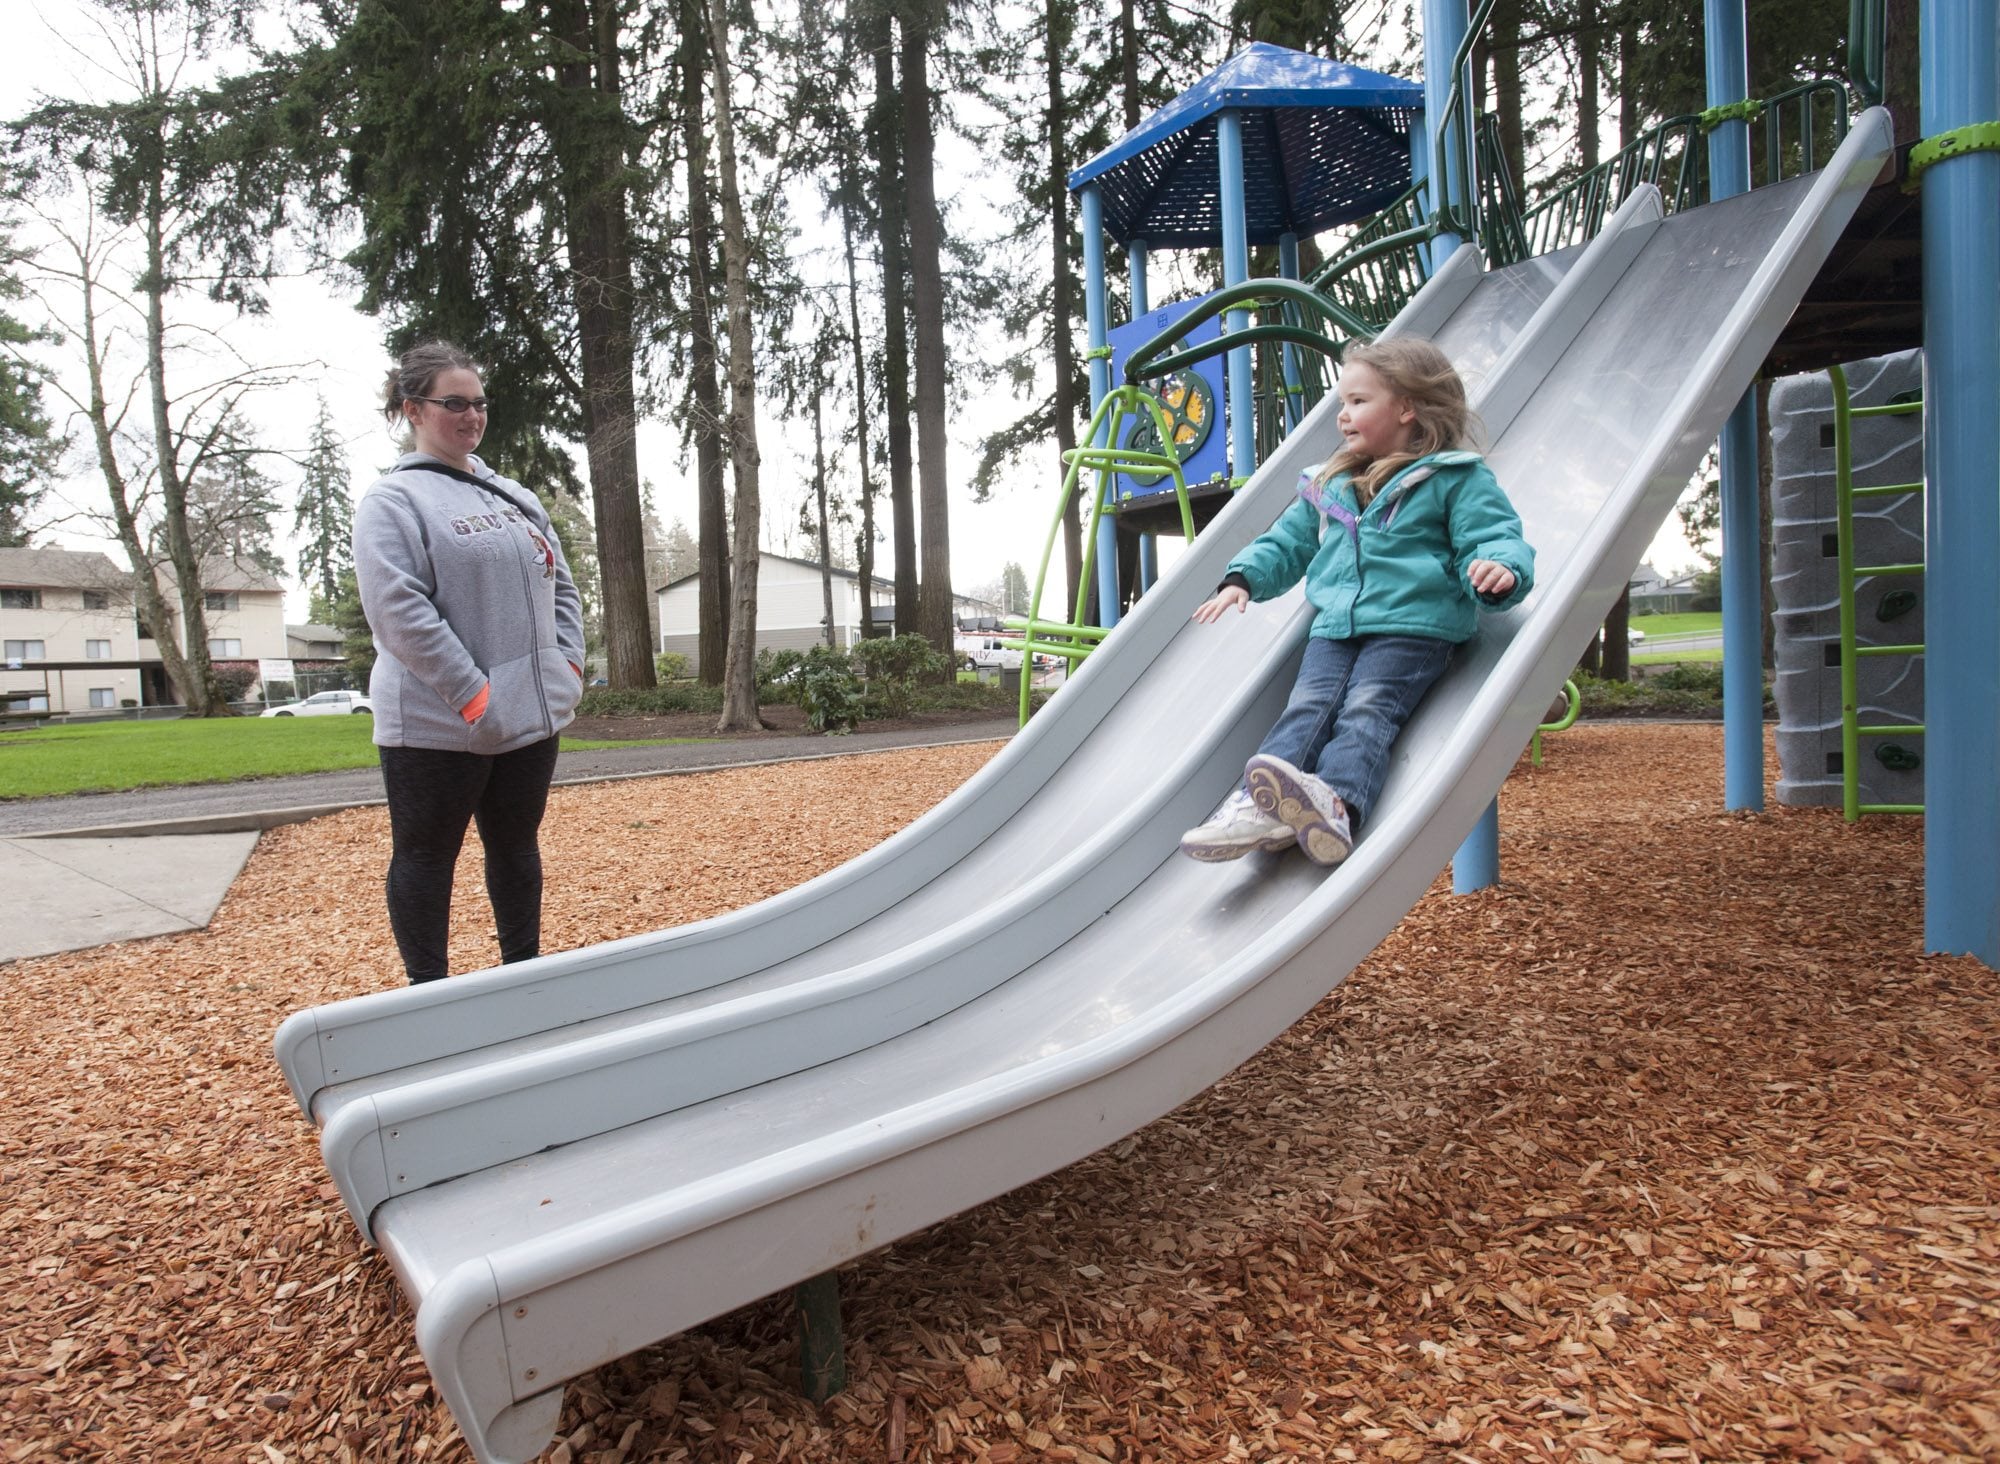 Kystran Knight, 3, slides on a new play structure as her mother, Mariah Watts, watches. Stockford Village Neighborhood Park was updated last month. A bright, new place structure has replaced old monkey bars and a swing set.